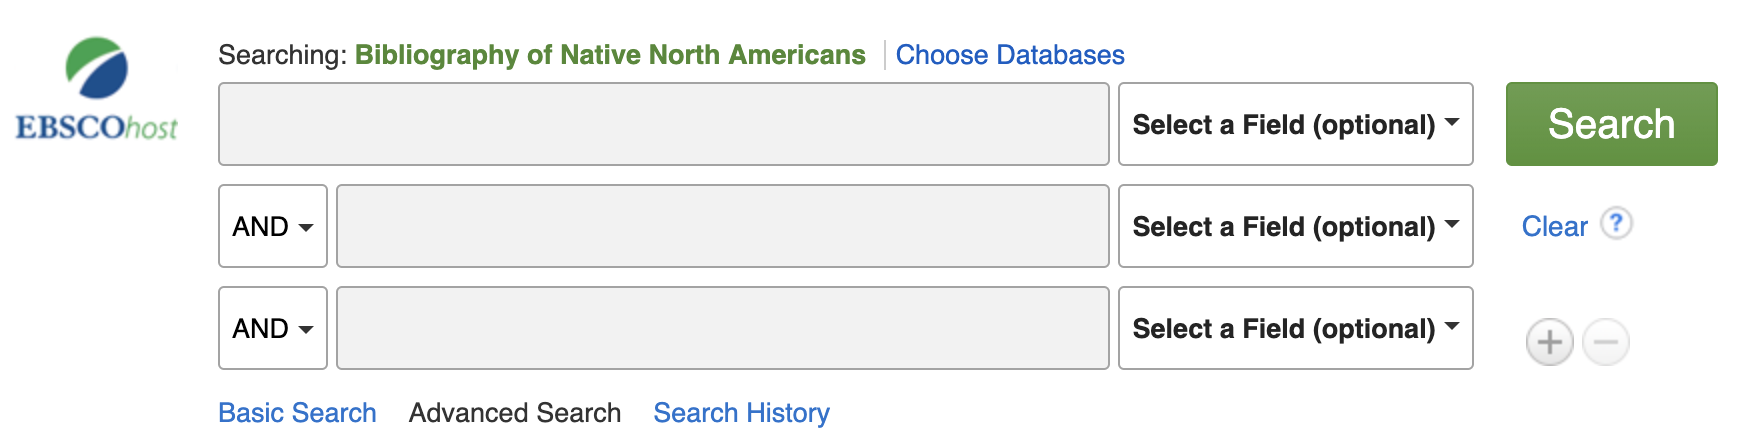 screen capture of the search field for the online resource collection page